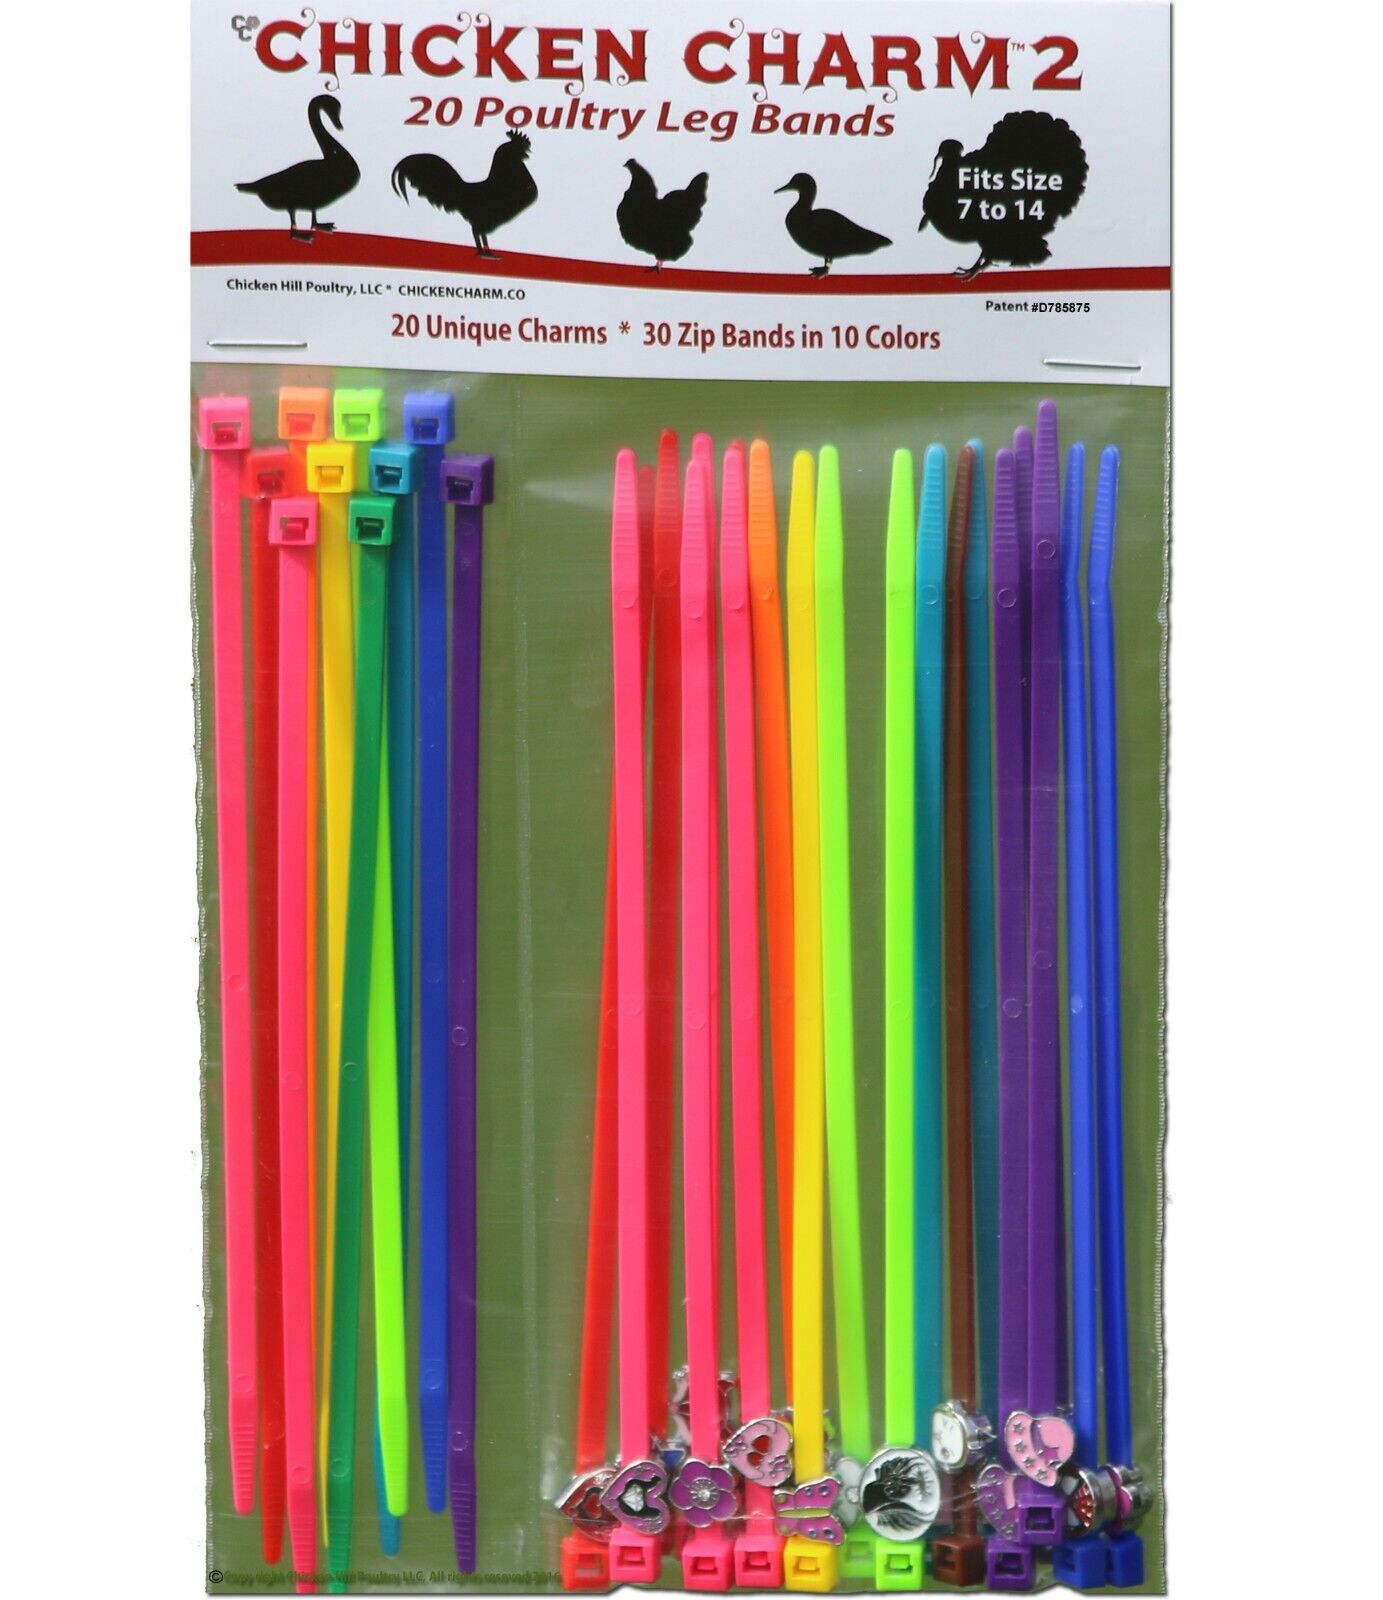 20 Max 65% OFF Nashville-Davidson Mall Chicken Charm ® 2 Poultry Leg Chickens Duck S Bands ~ Geese